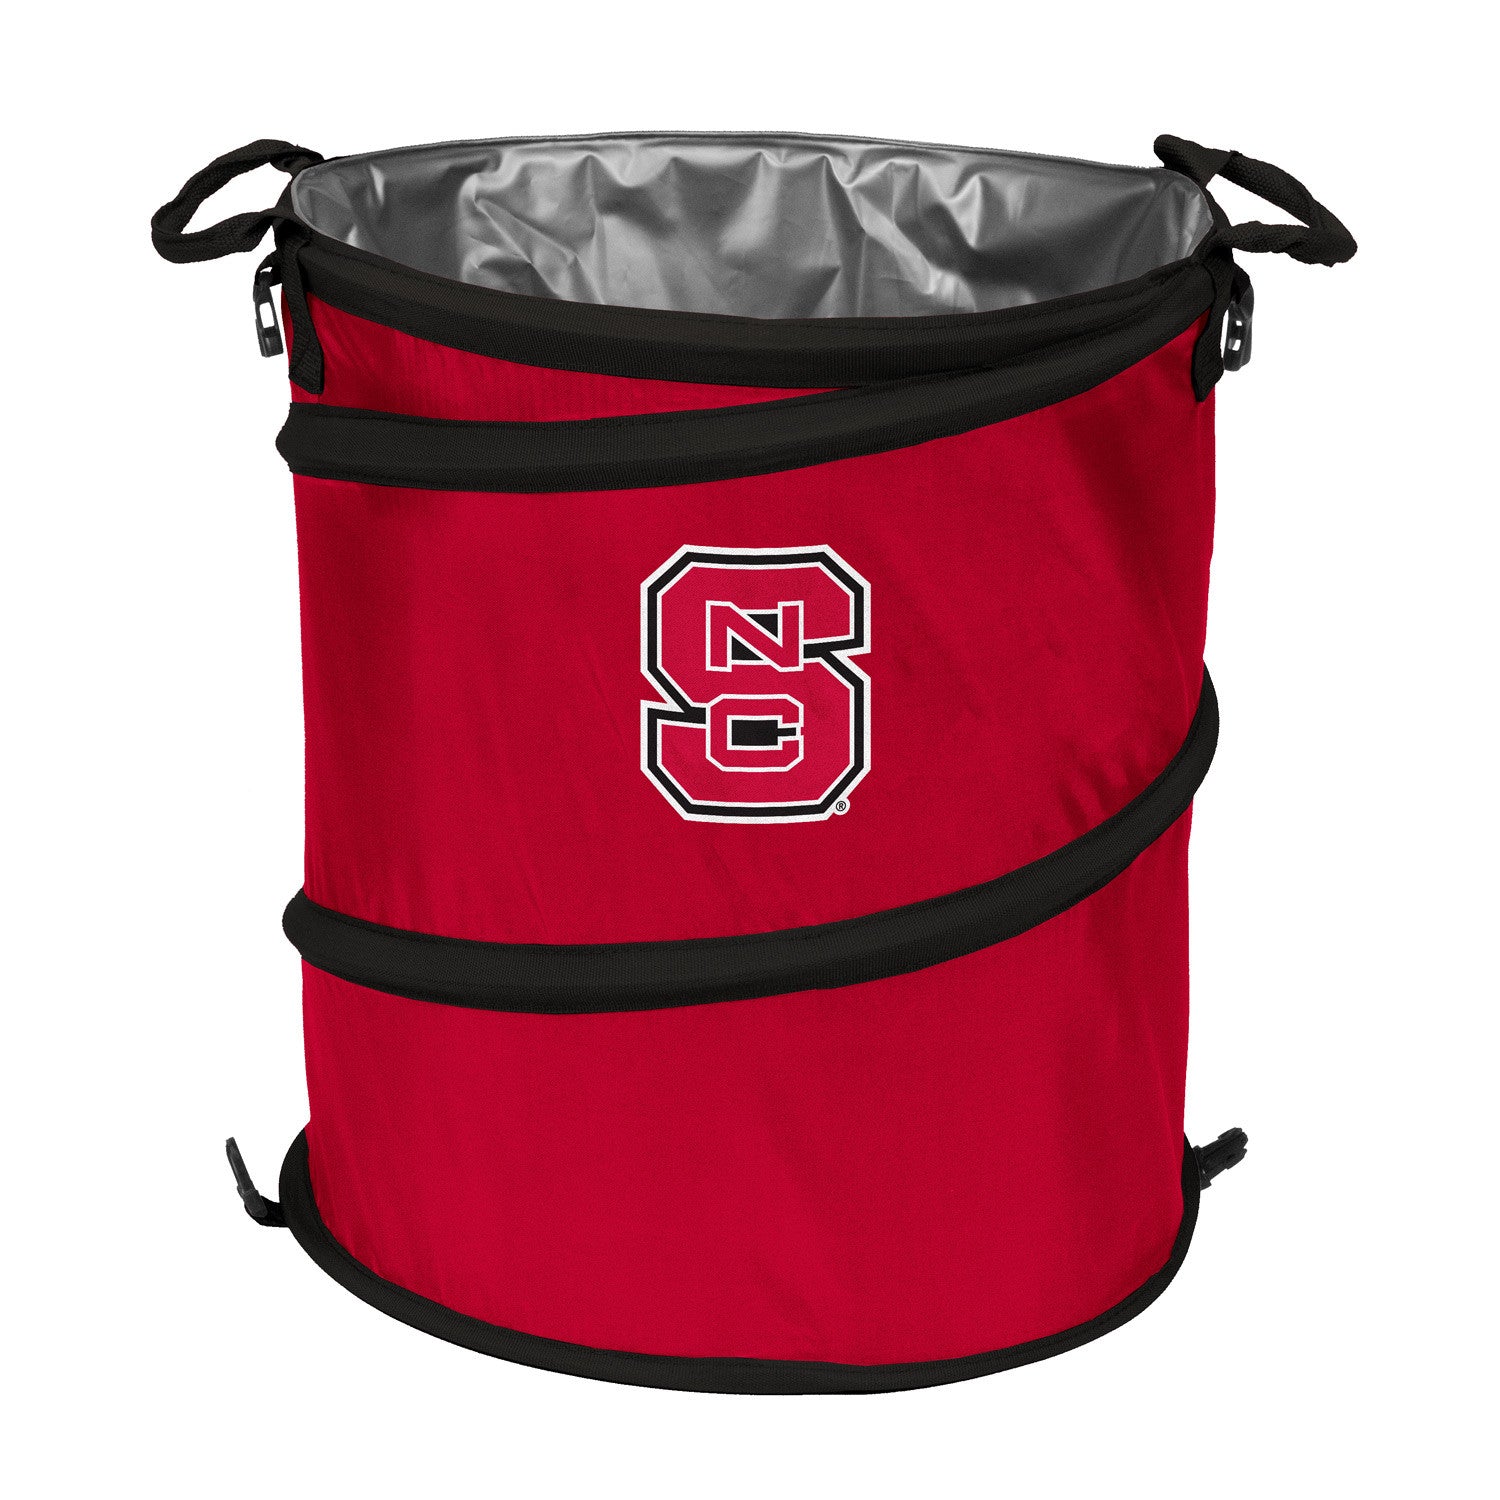 NC State Wolfpack 2-Tone 3-in-1 Collapsible Bin